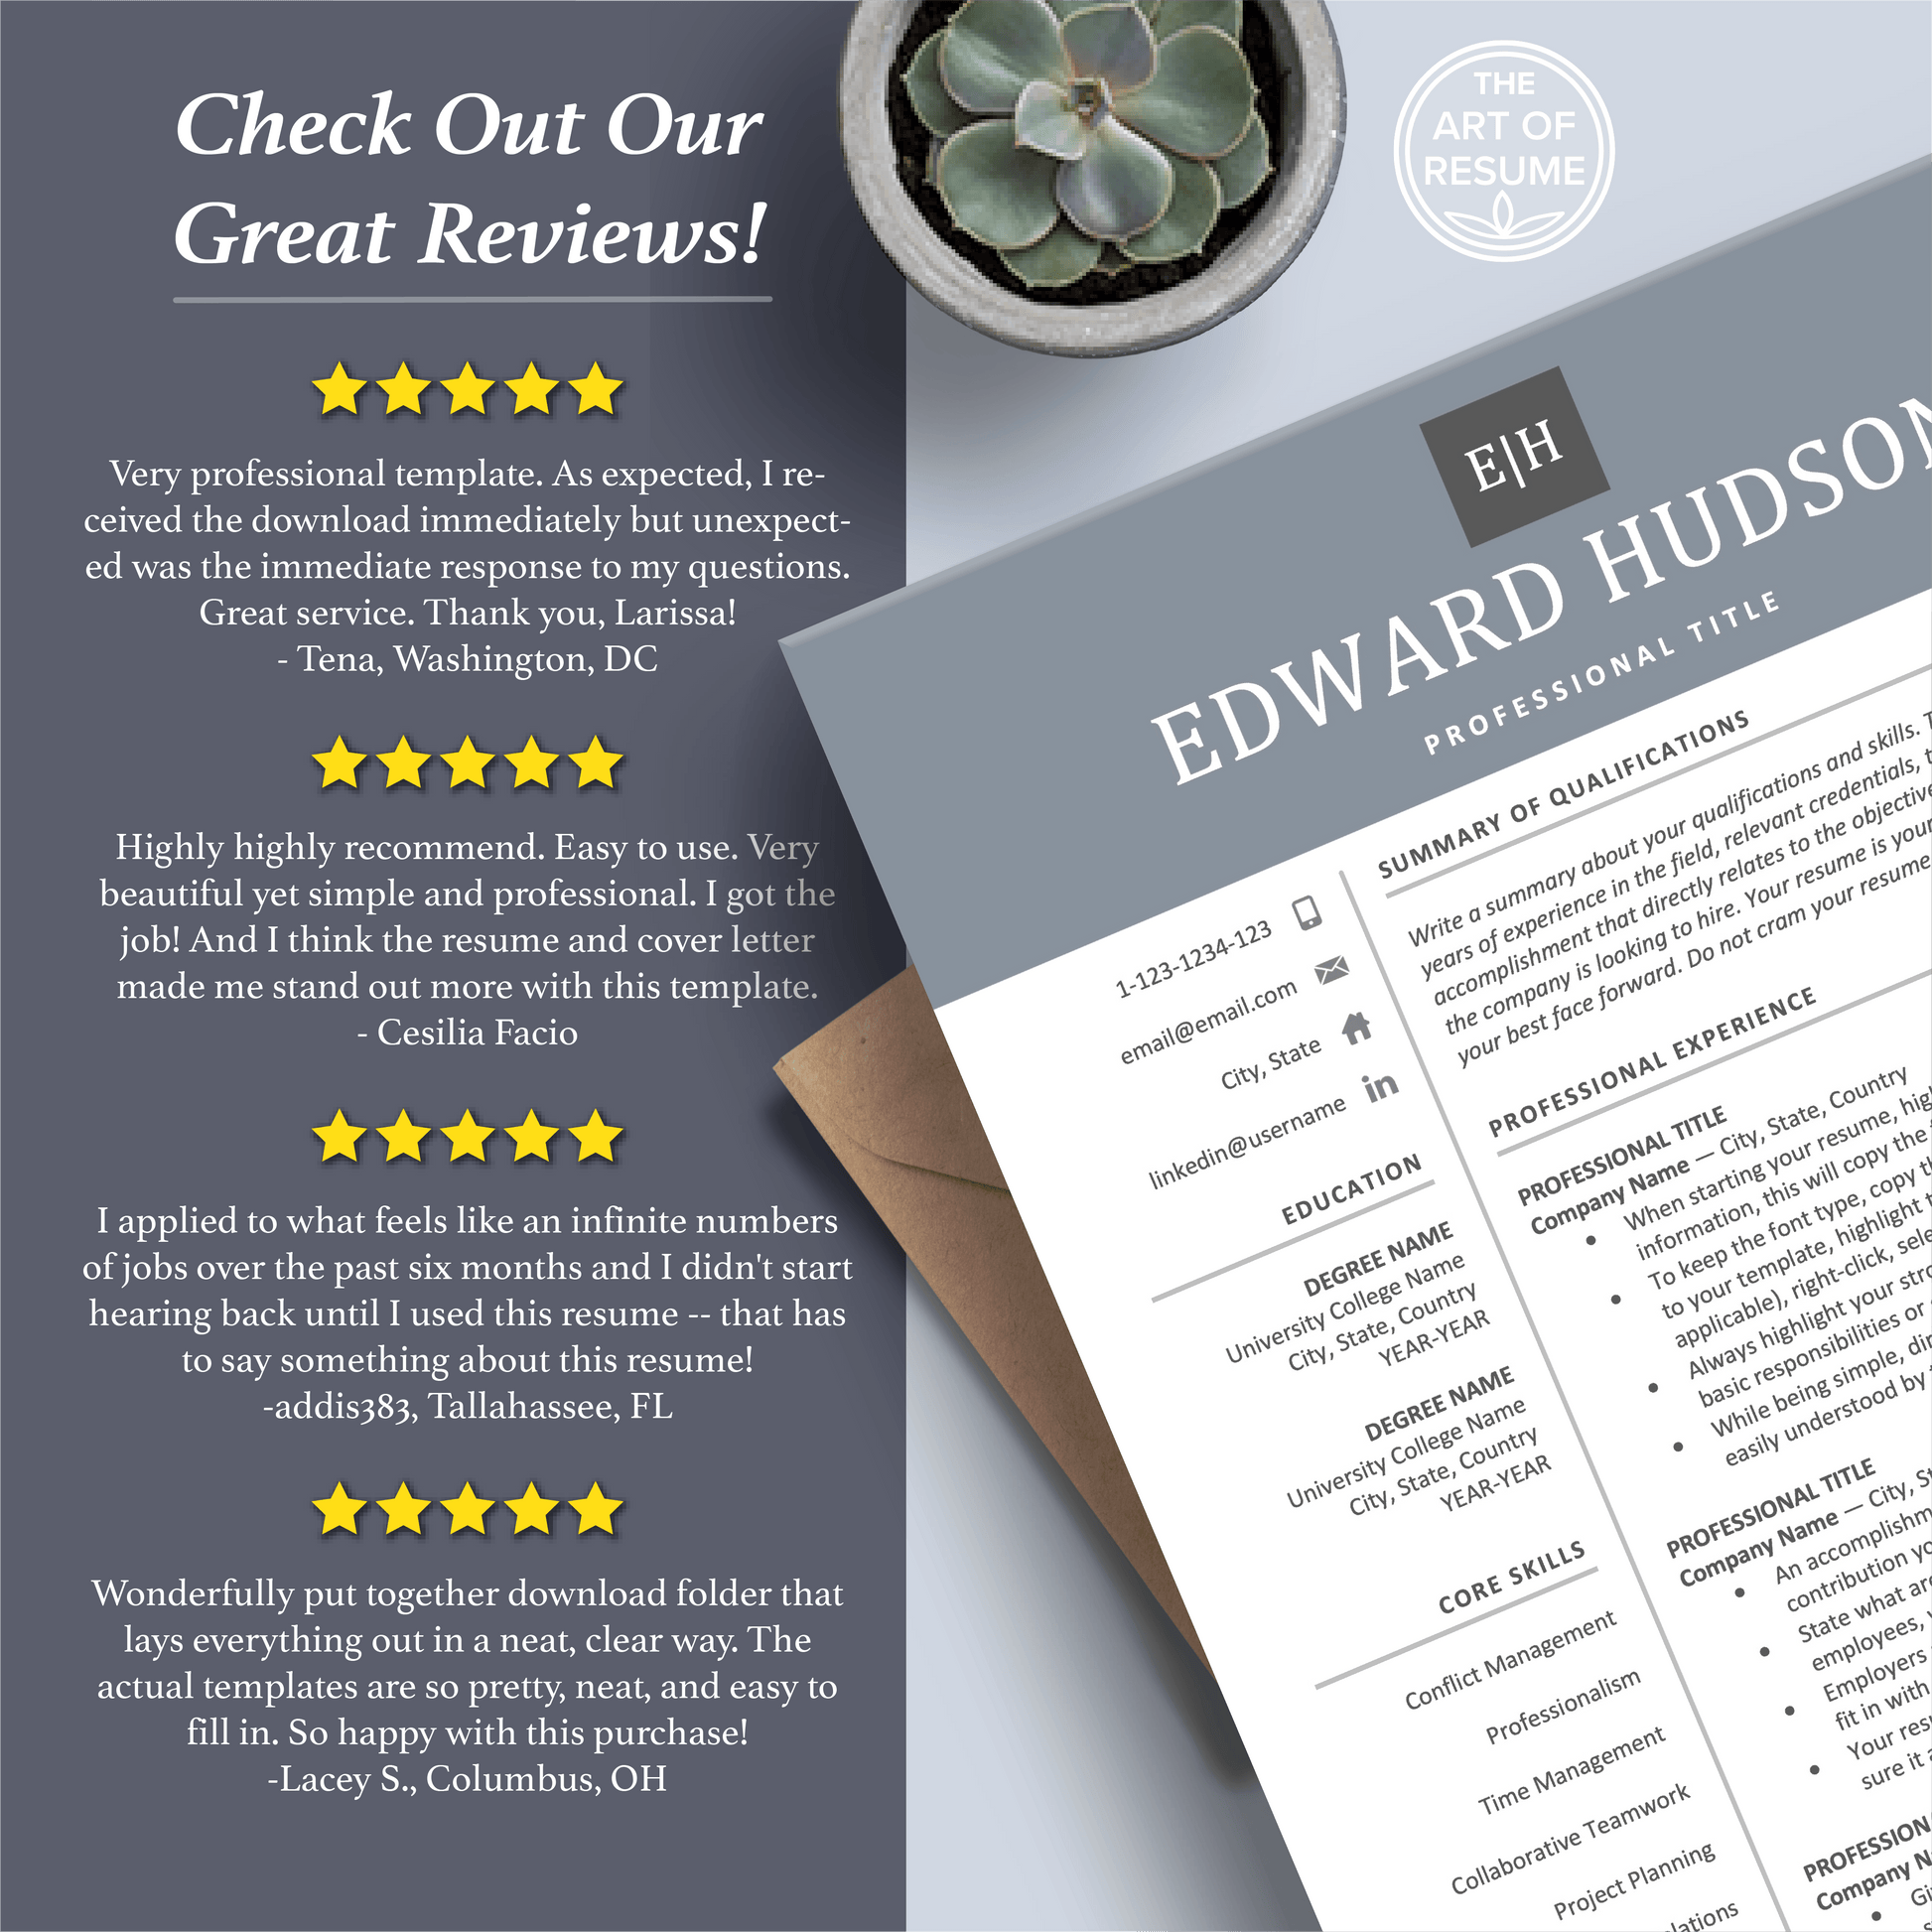 The Art of Resume Templates | Professional  Blue Grey Resume CV Templates Online 5-Star Reviews